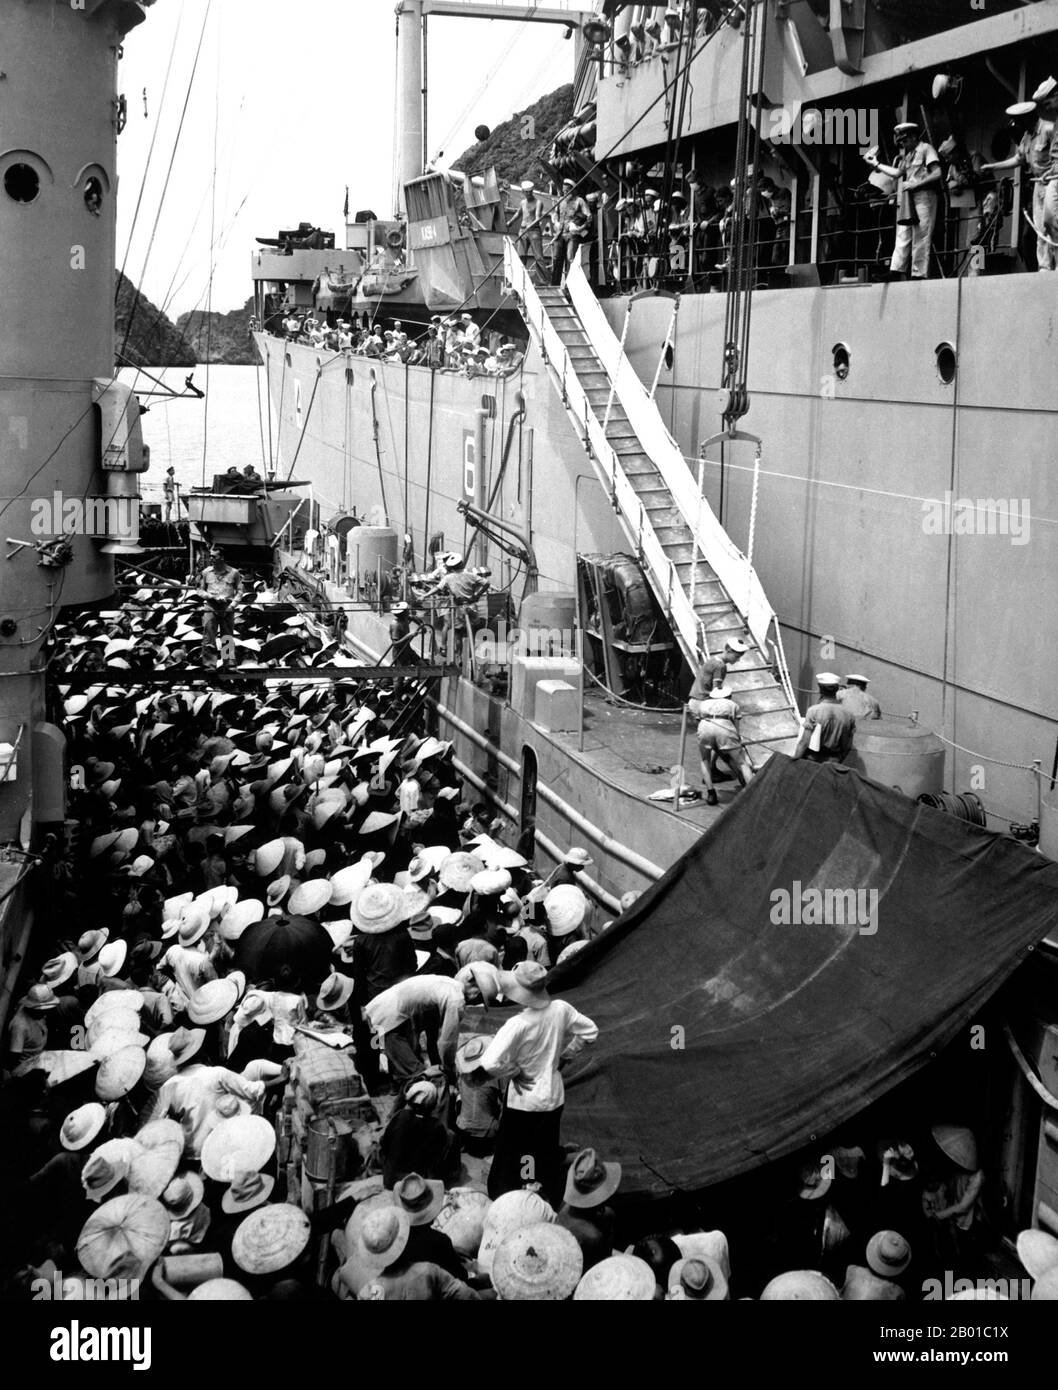 Vietnam: Vietnamese Catholic refugees leaving Haiphong on the USS Montague for South Vietnam. Photo by H.S. Hemphill (public domain), 1 August 1954.  After the end of the French rule in 1954s, Catholicism declined in the North, where the Communists regarded it as a reactionary force opposed to national liberation and social progress. In the South, by contrast, Catholicism was expanded under the presidency of Ngo Dinh Diem, who promoted it as an important bulwark against North Vietnam. Stock Photo